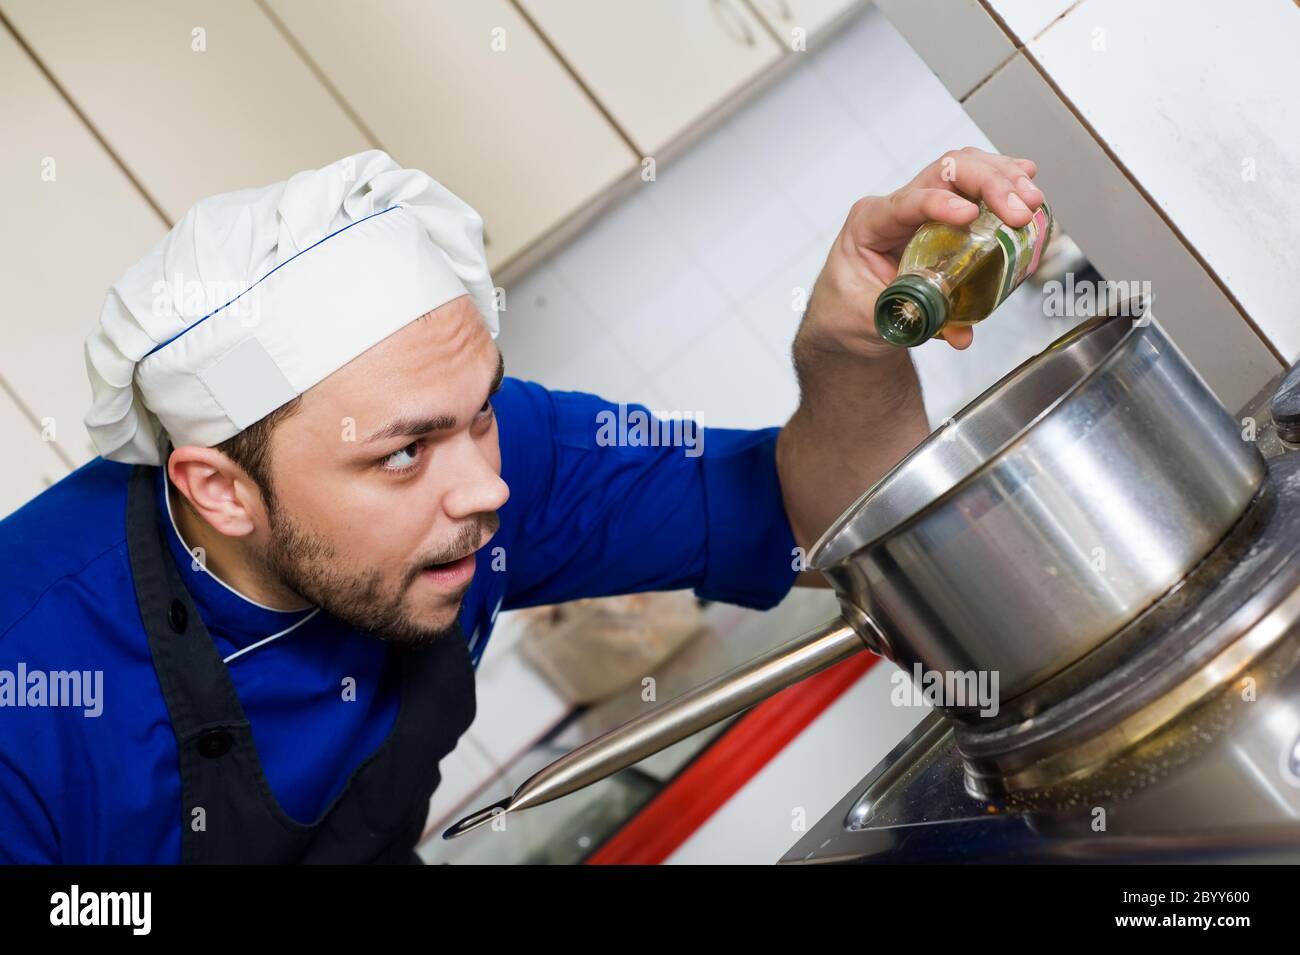 chef cooking a soup Stock Photo